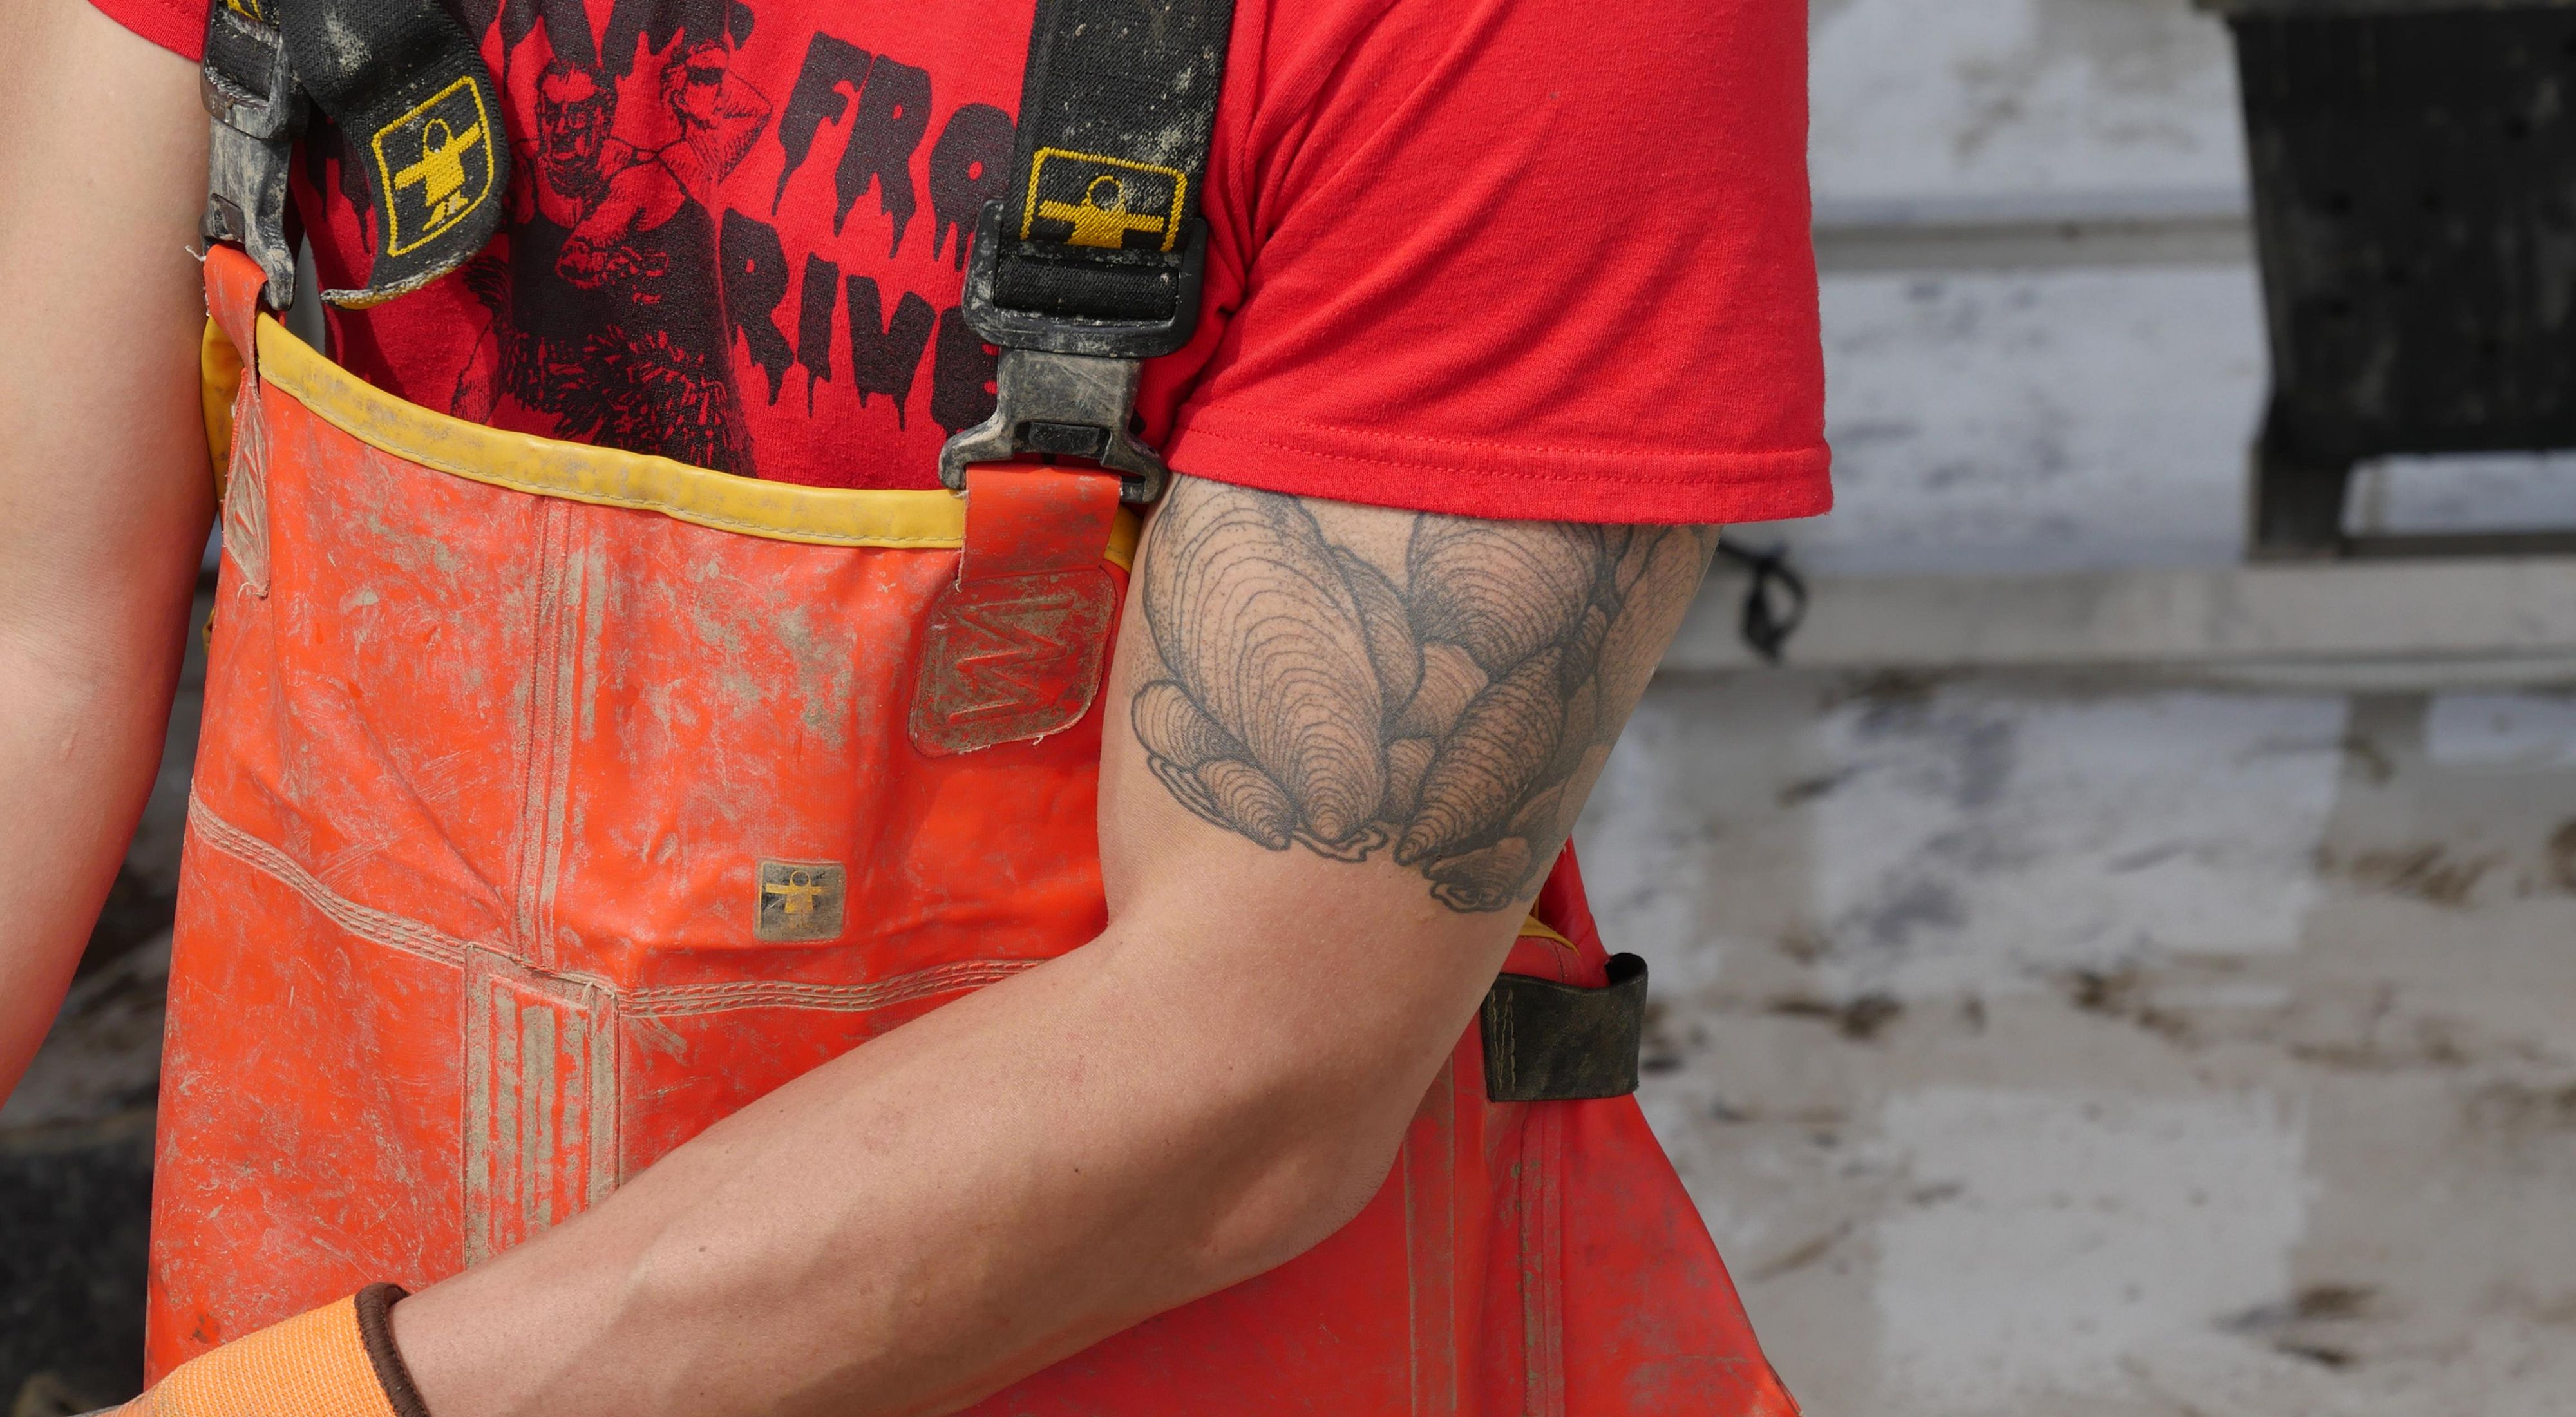 Close cropped view of a man man wearing orange chest waders shucking oysters. He has a large tattoo of a clump of mature oysters on his bicep visible beneath the sleeve of his red tshirt.